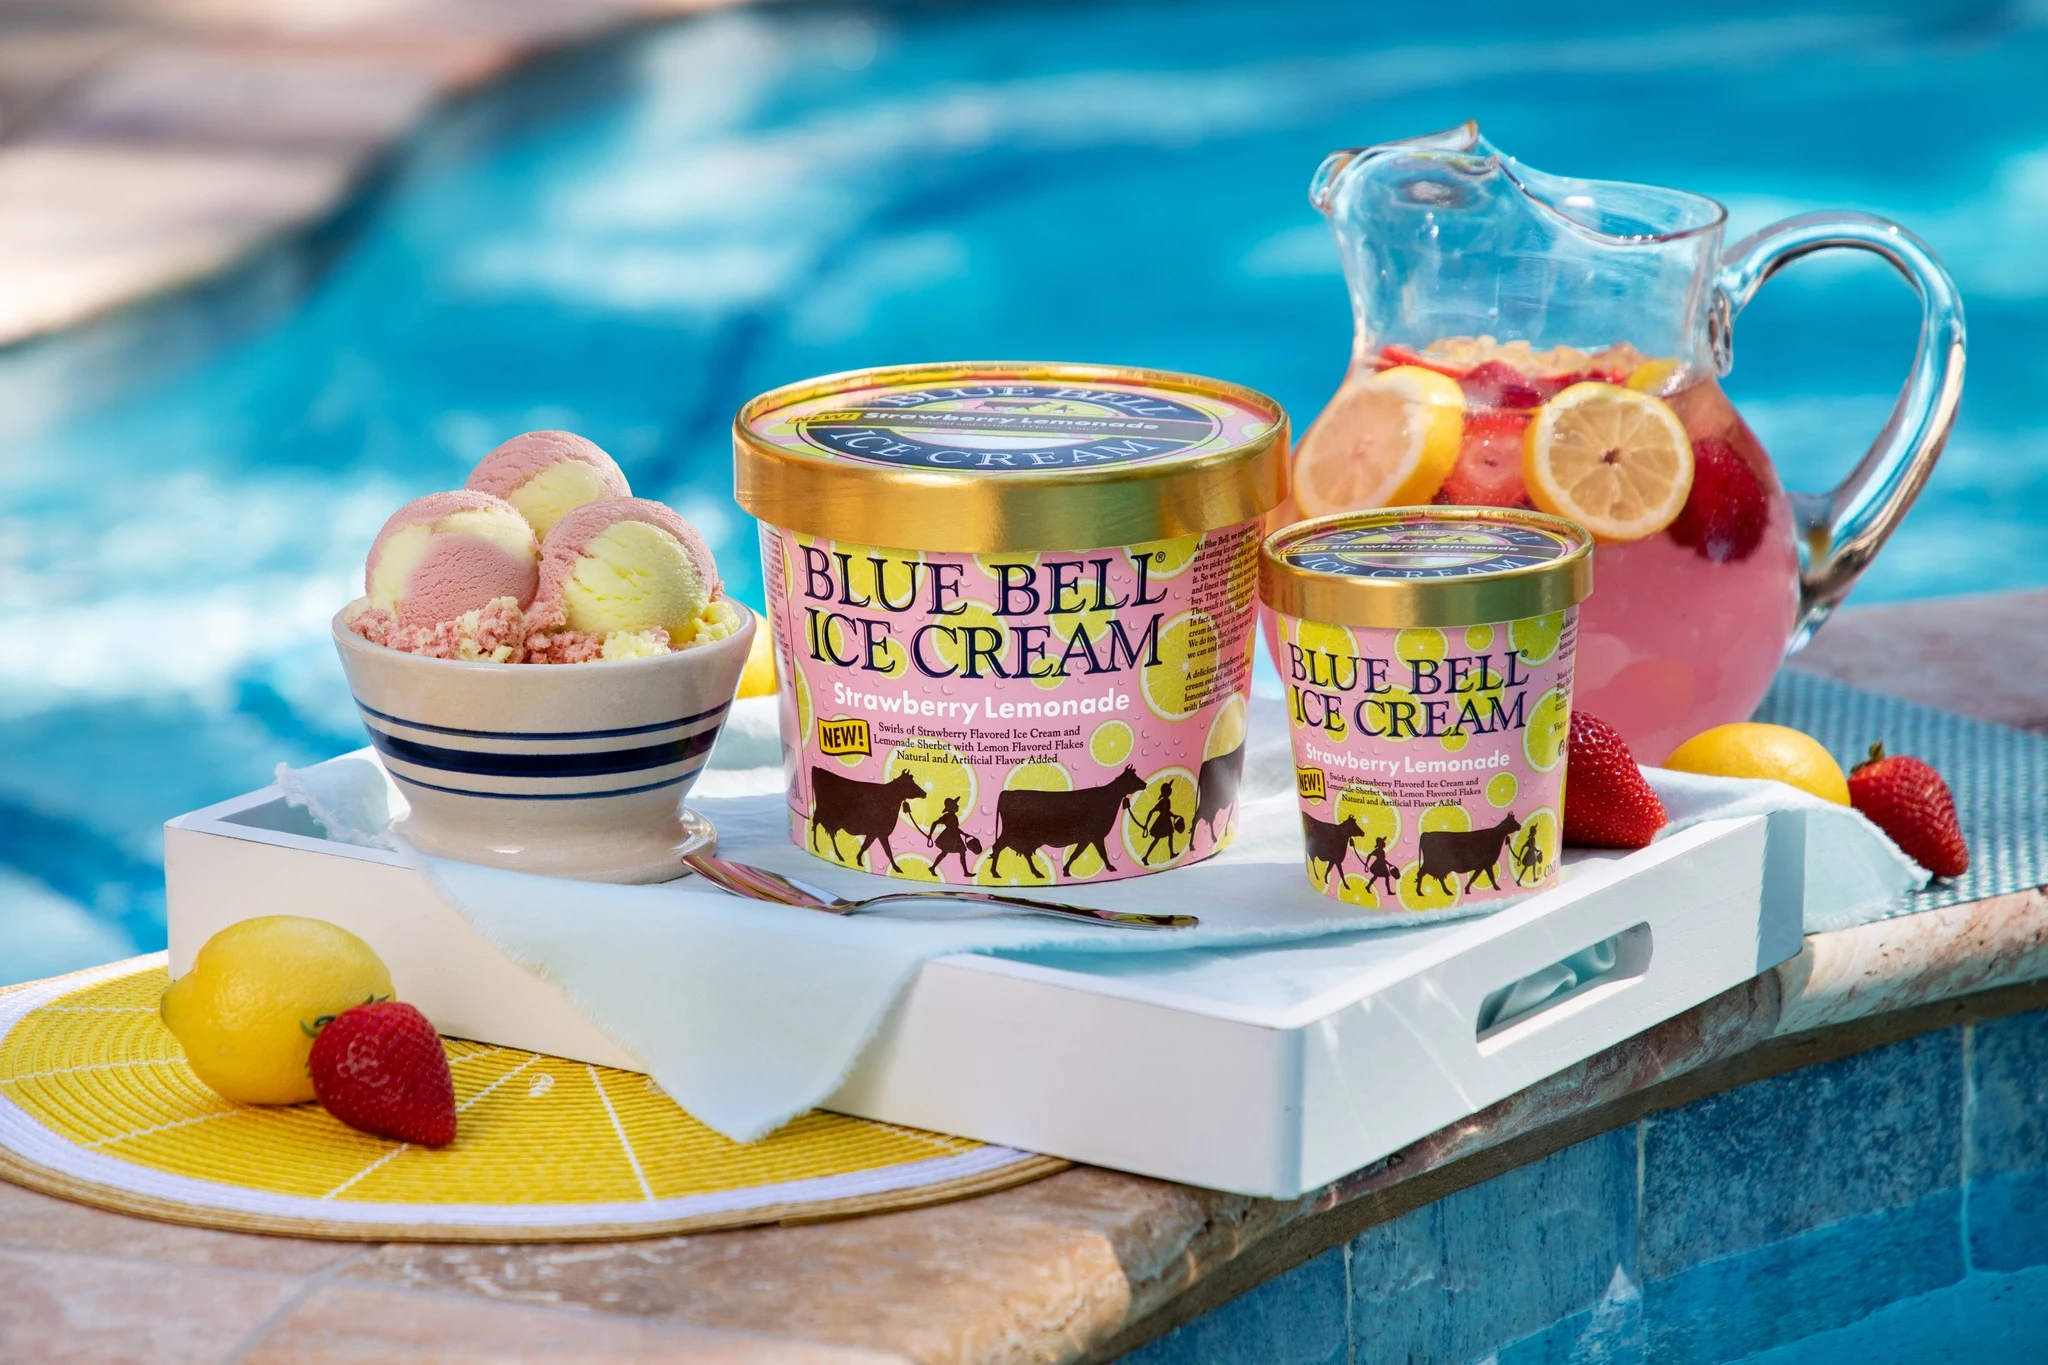 Blue Bell® and Dr Pepper® team up for new Dr Pepper Float Ice